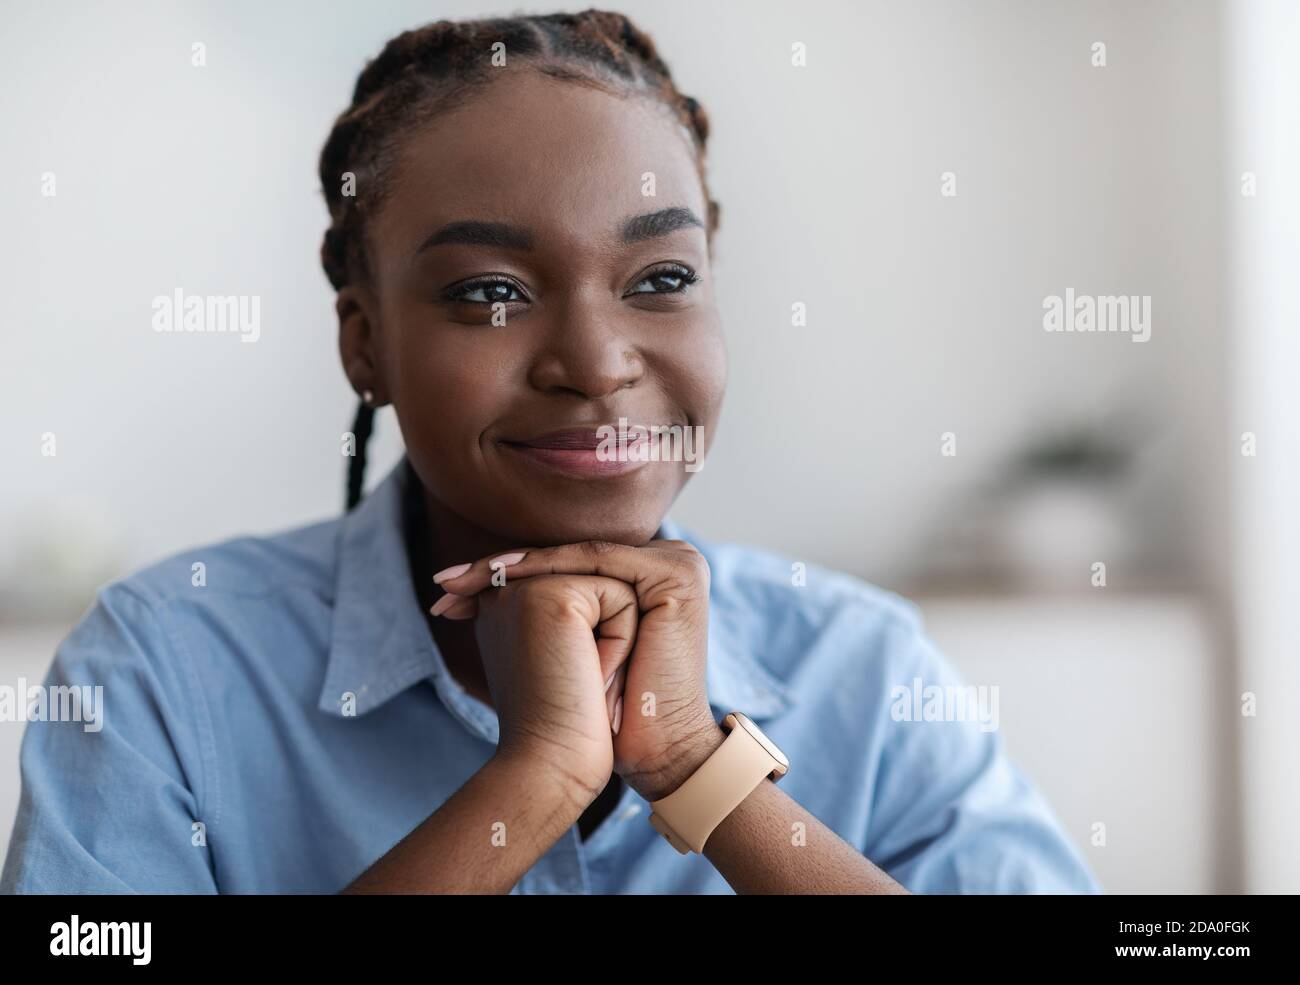 Closeup Portrait Of Dreamy Young Black Woman With Braids Looking Away Stock Photo